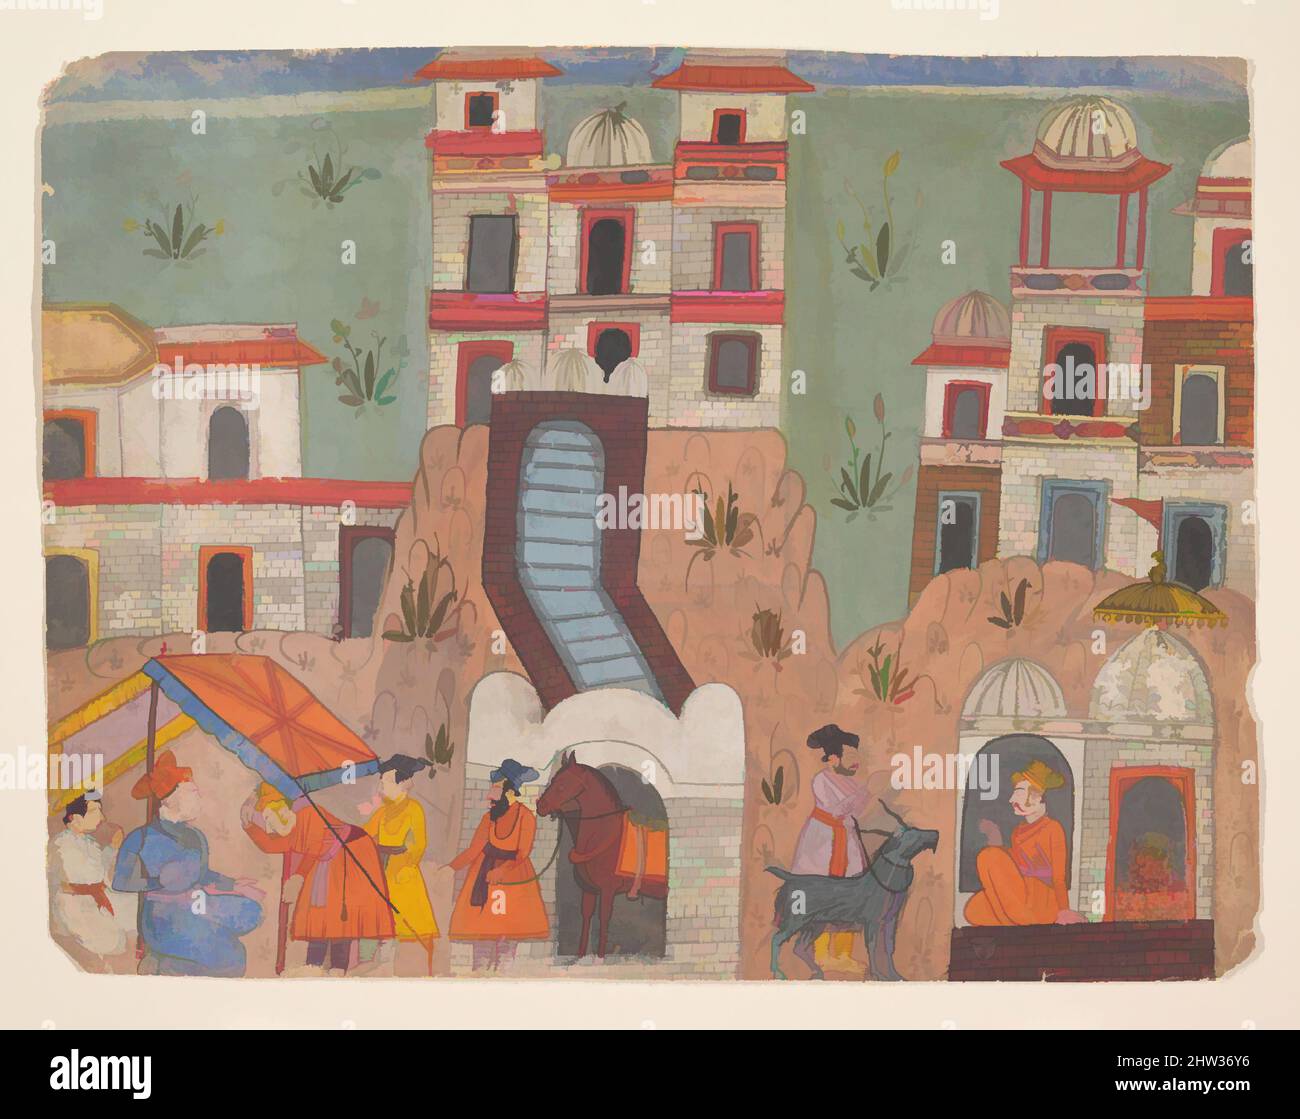 Art inspired by A Raja Receives Homage Outside the City: Page from a Dispersed Manuscript, last quarter of the 17th century, India (Punjab Hills, Bilaspur), Ink and opaque watercolor on paper, 8 7/8 x 11 1/2 in. (22.5 x 29.2 cm), Paintings, This page from an unidentified Hindu, Classic works modernized by Artotop with a splash of modernity. Shapes, color and value, eye-catching visual impact on art. Emotions through freedom of artworks in a contemporary way. A timeless message pursuing a wildly creative new direction. Artists turning to the digital medium and creating the Artotop NFT Stock Photo